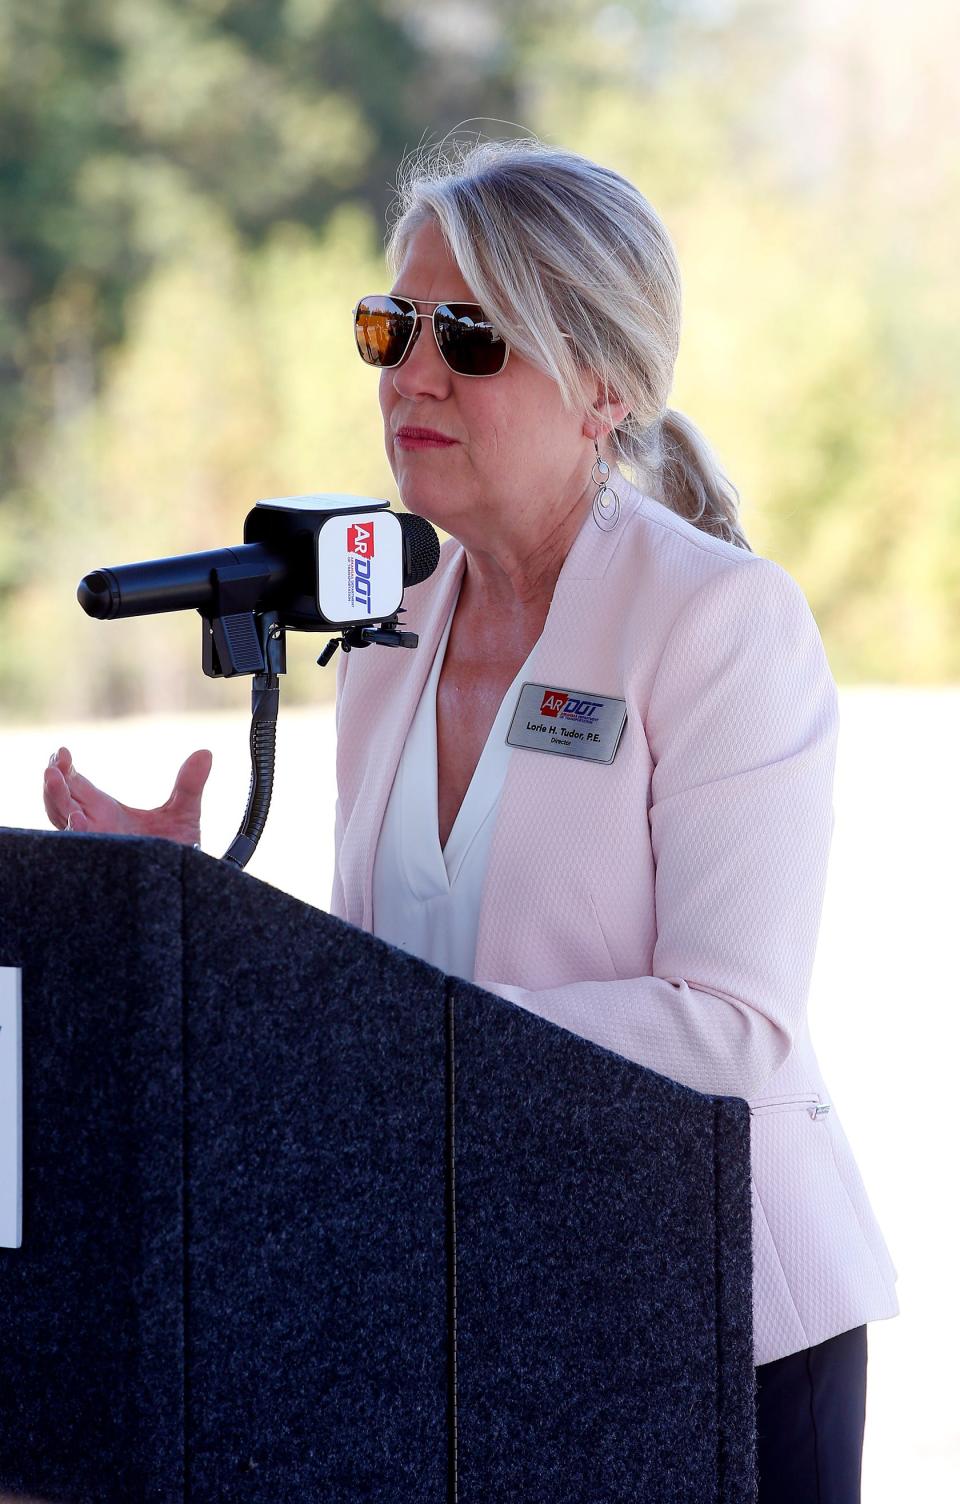 Lorie Tudor, director of the Arkansas Department of Transportation, served as moderator for the groundbreaking on Oct. 13 of the I-49 expansion in Barling, Ark. The expansion is to connect part of the completed project in Sebastian County to the I-49 exchange near Alma in Crawford County including a new bridge across the Arkansas River.